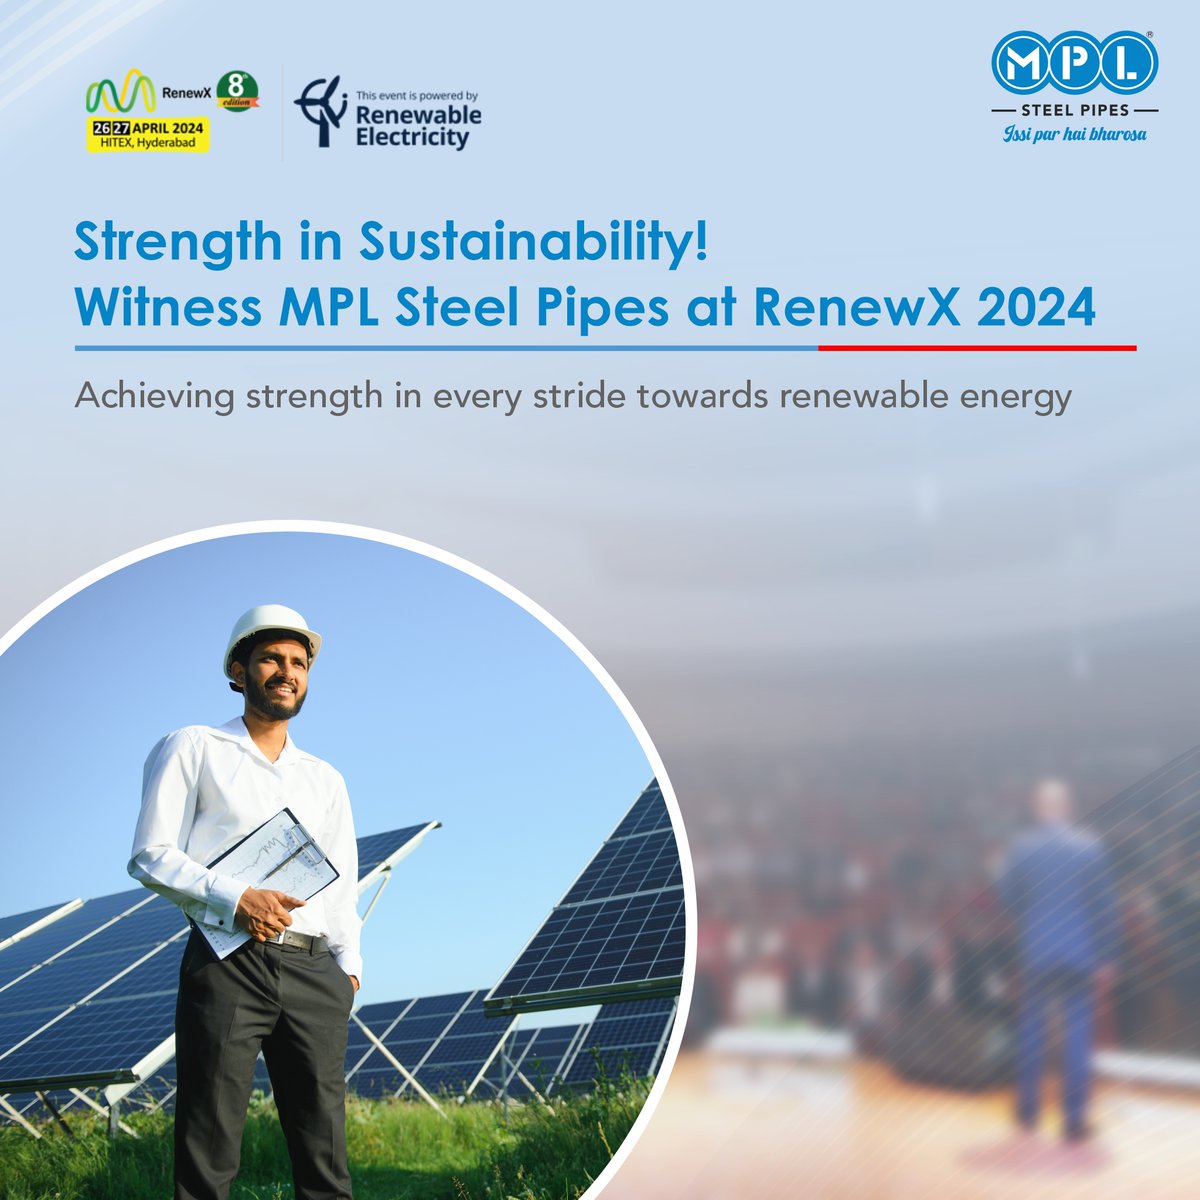 Join us at RenewX 2024 as MPL Steel Pipes stands tall, fortifying the foundation of renewable energy with strength and resilience.
@renewxindia
#MPLSteelPipes #IssiParHaiBharosa #steelindustry #MSPipes #renewx2024 #RenewX #renewablenergy #sustainability